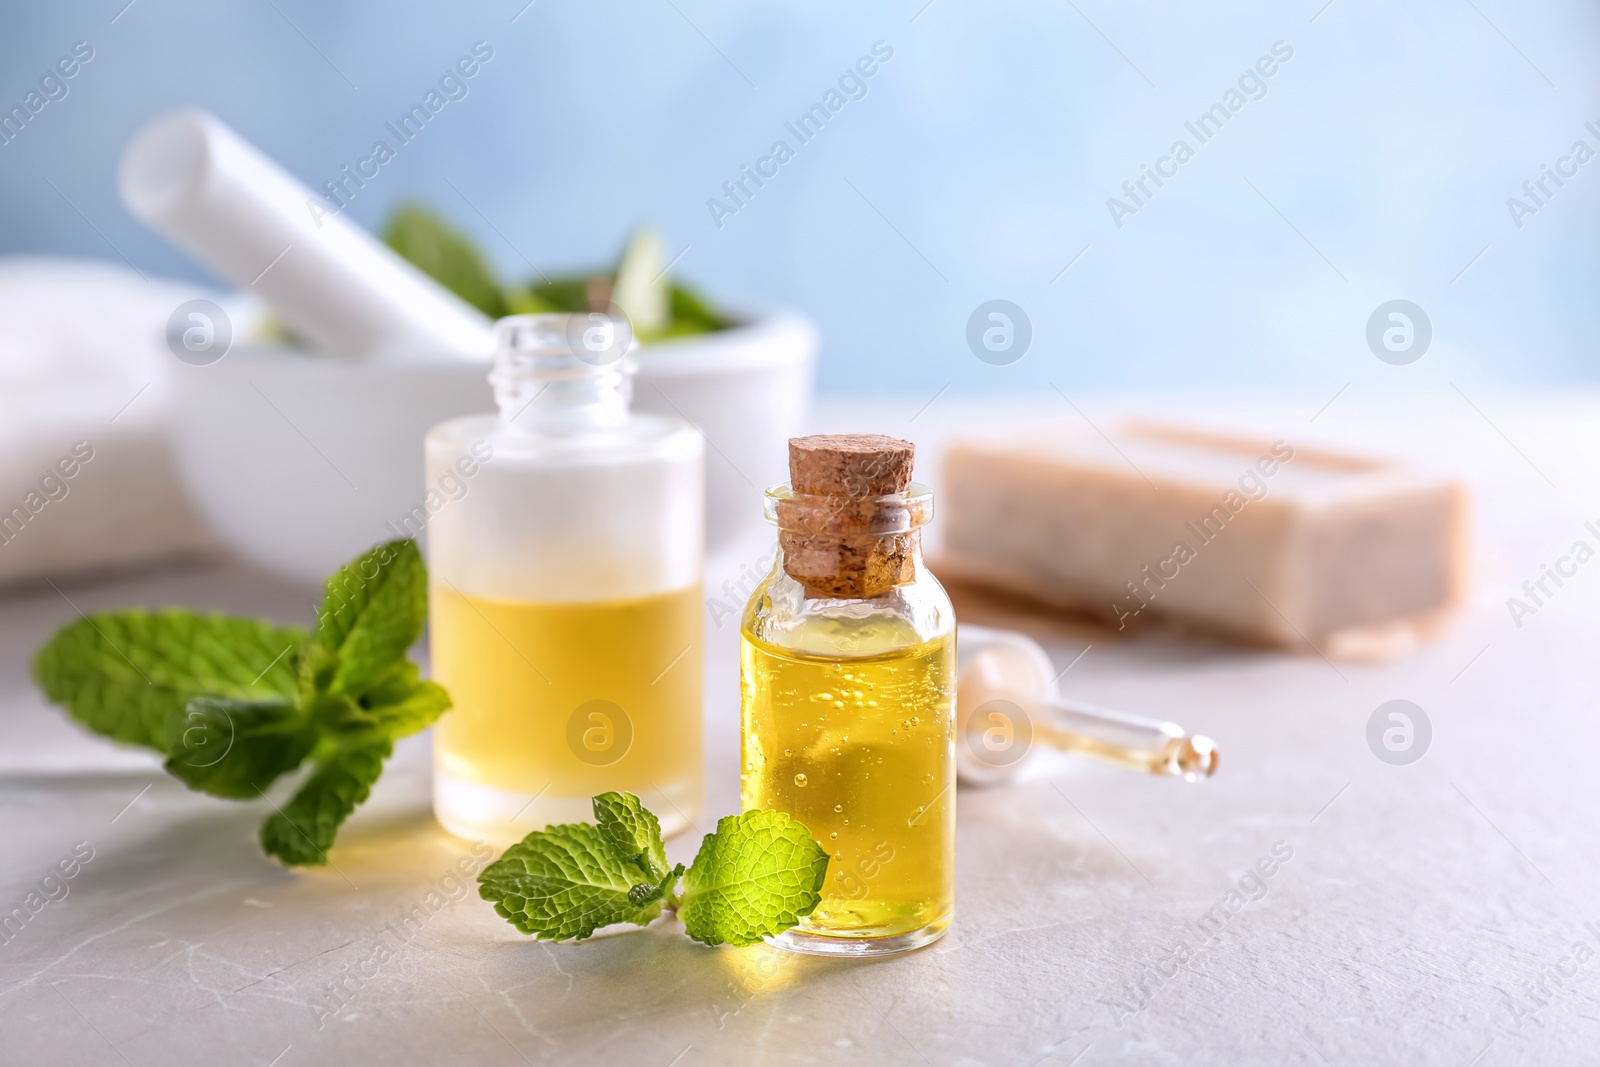 Photo of Bottles with mint essential oil on table